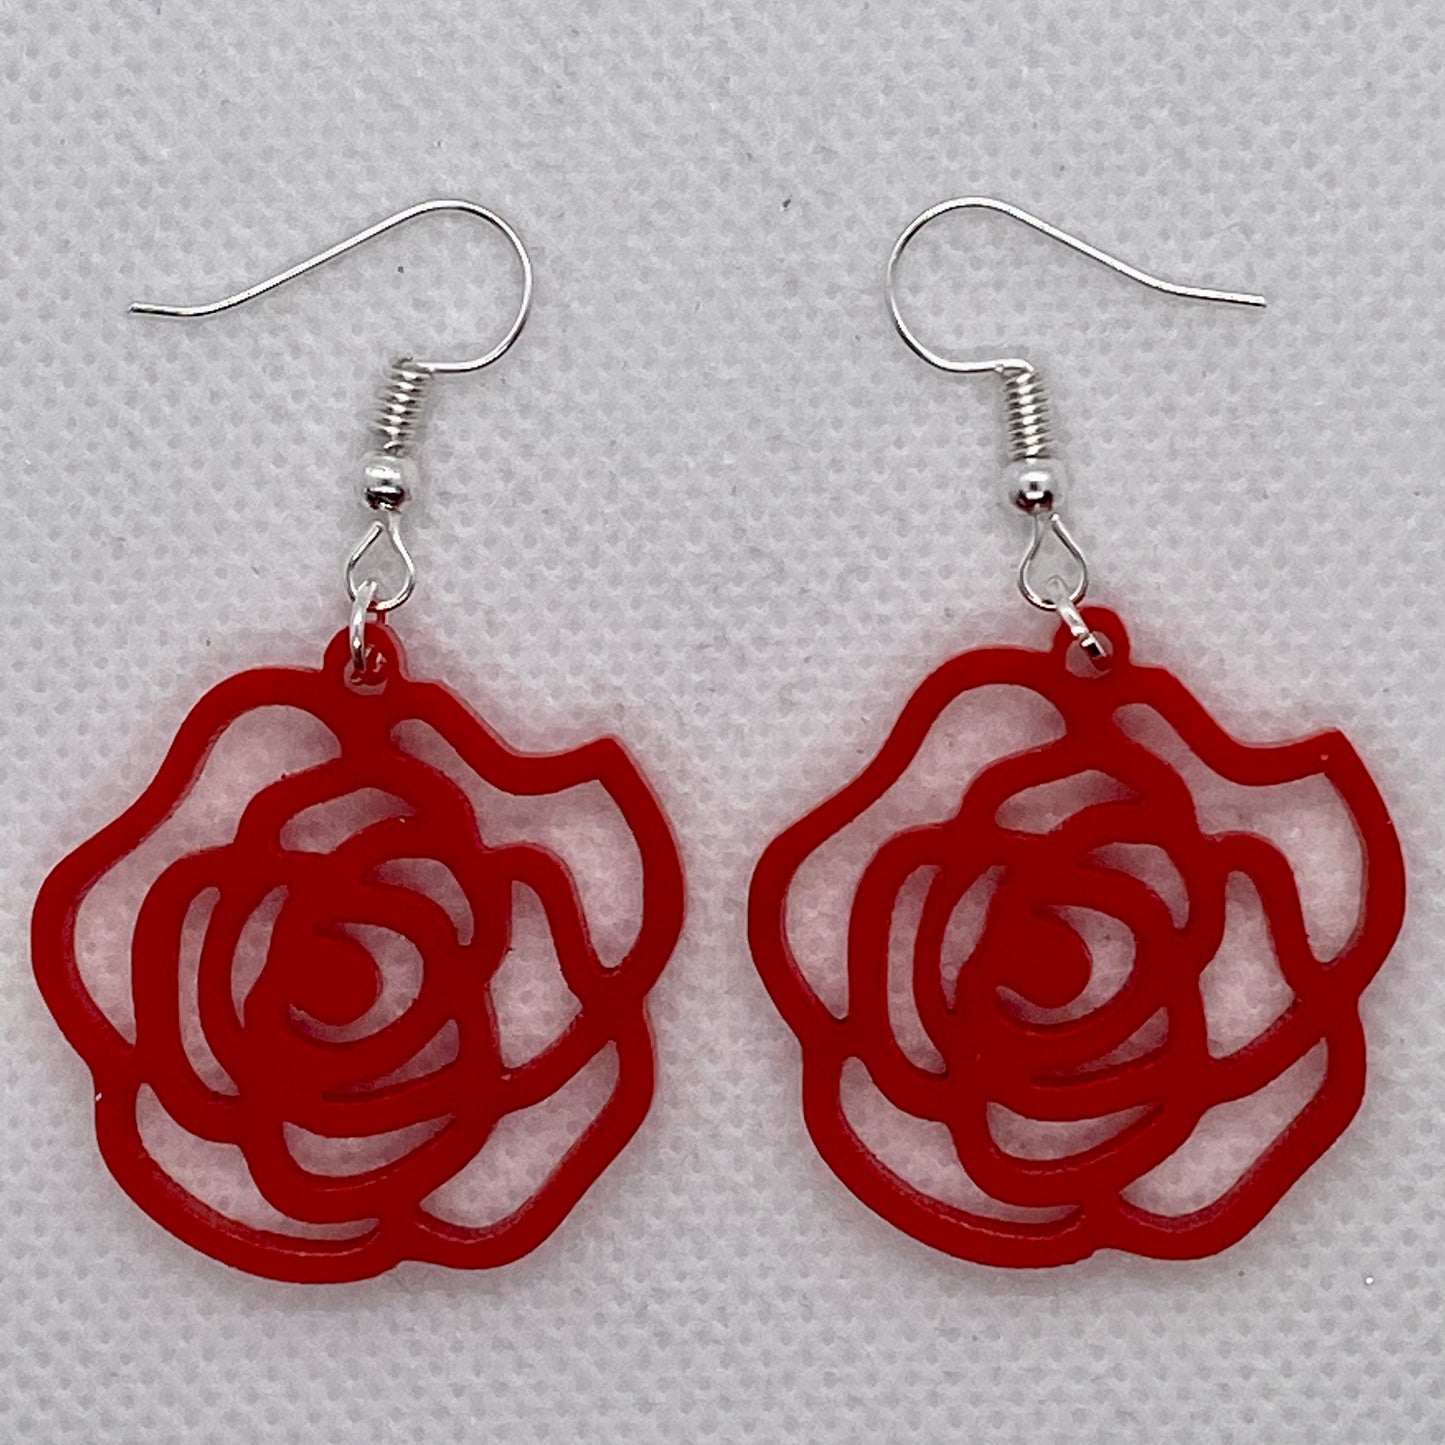 Red Rose Cut Out Acrylic Earrings